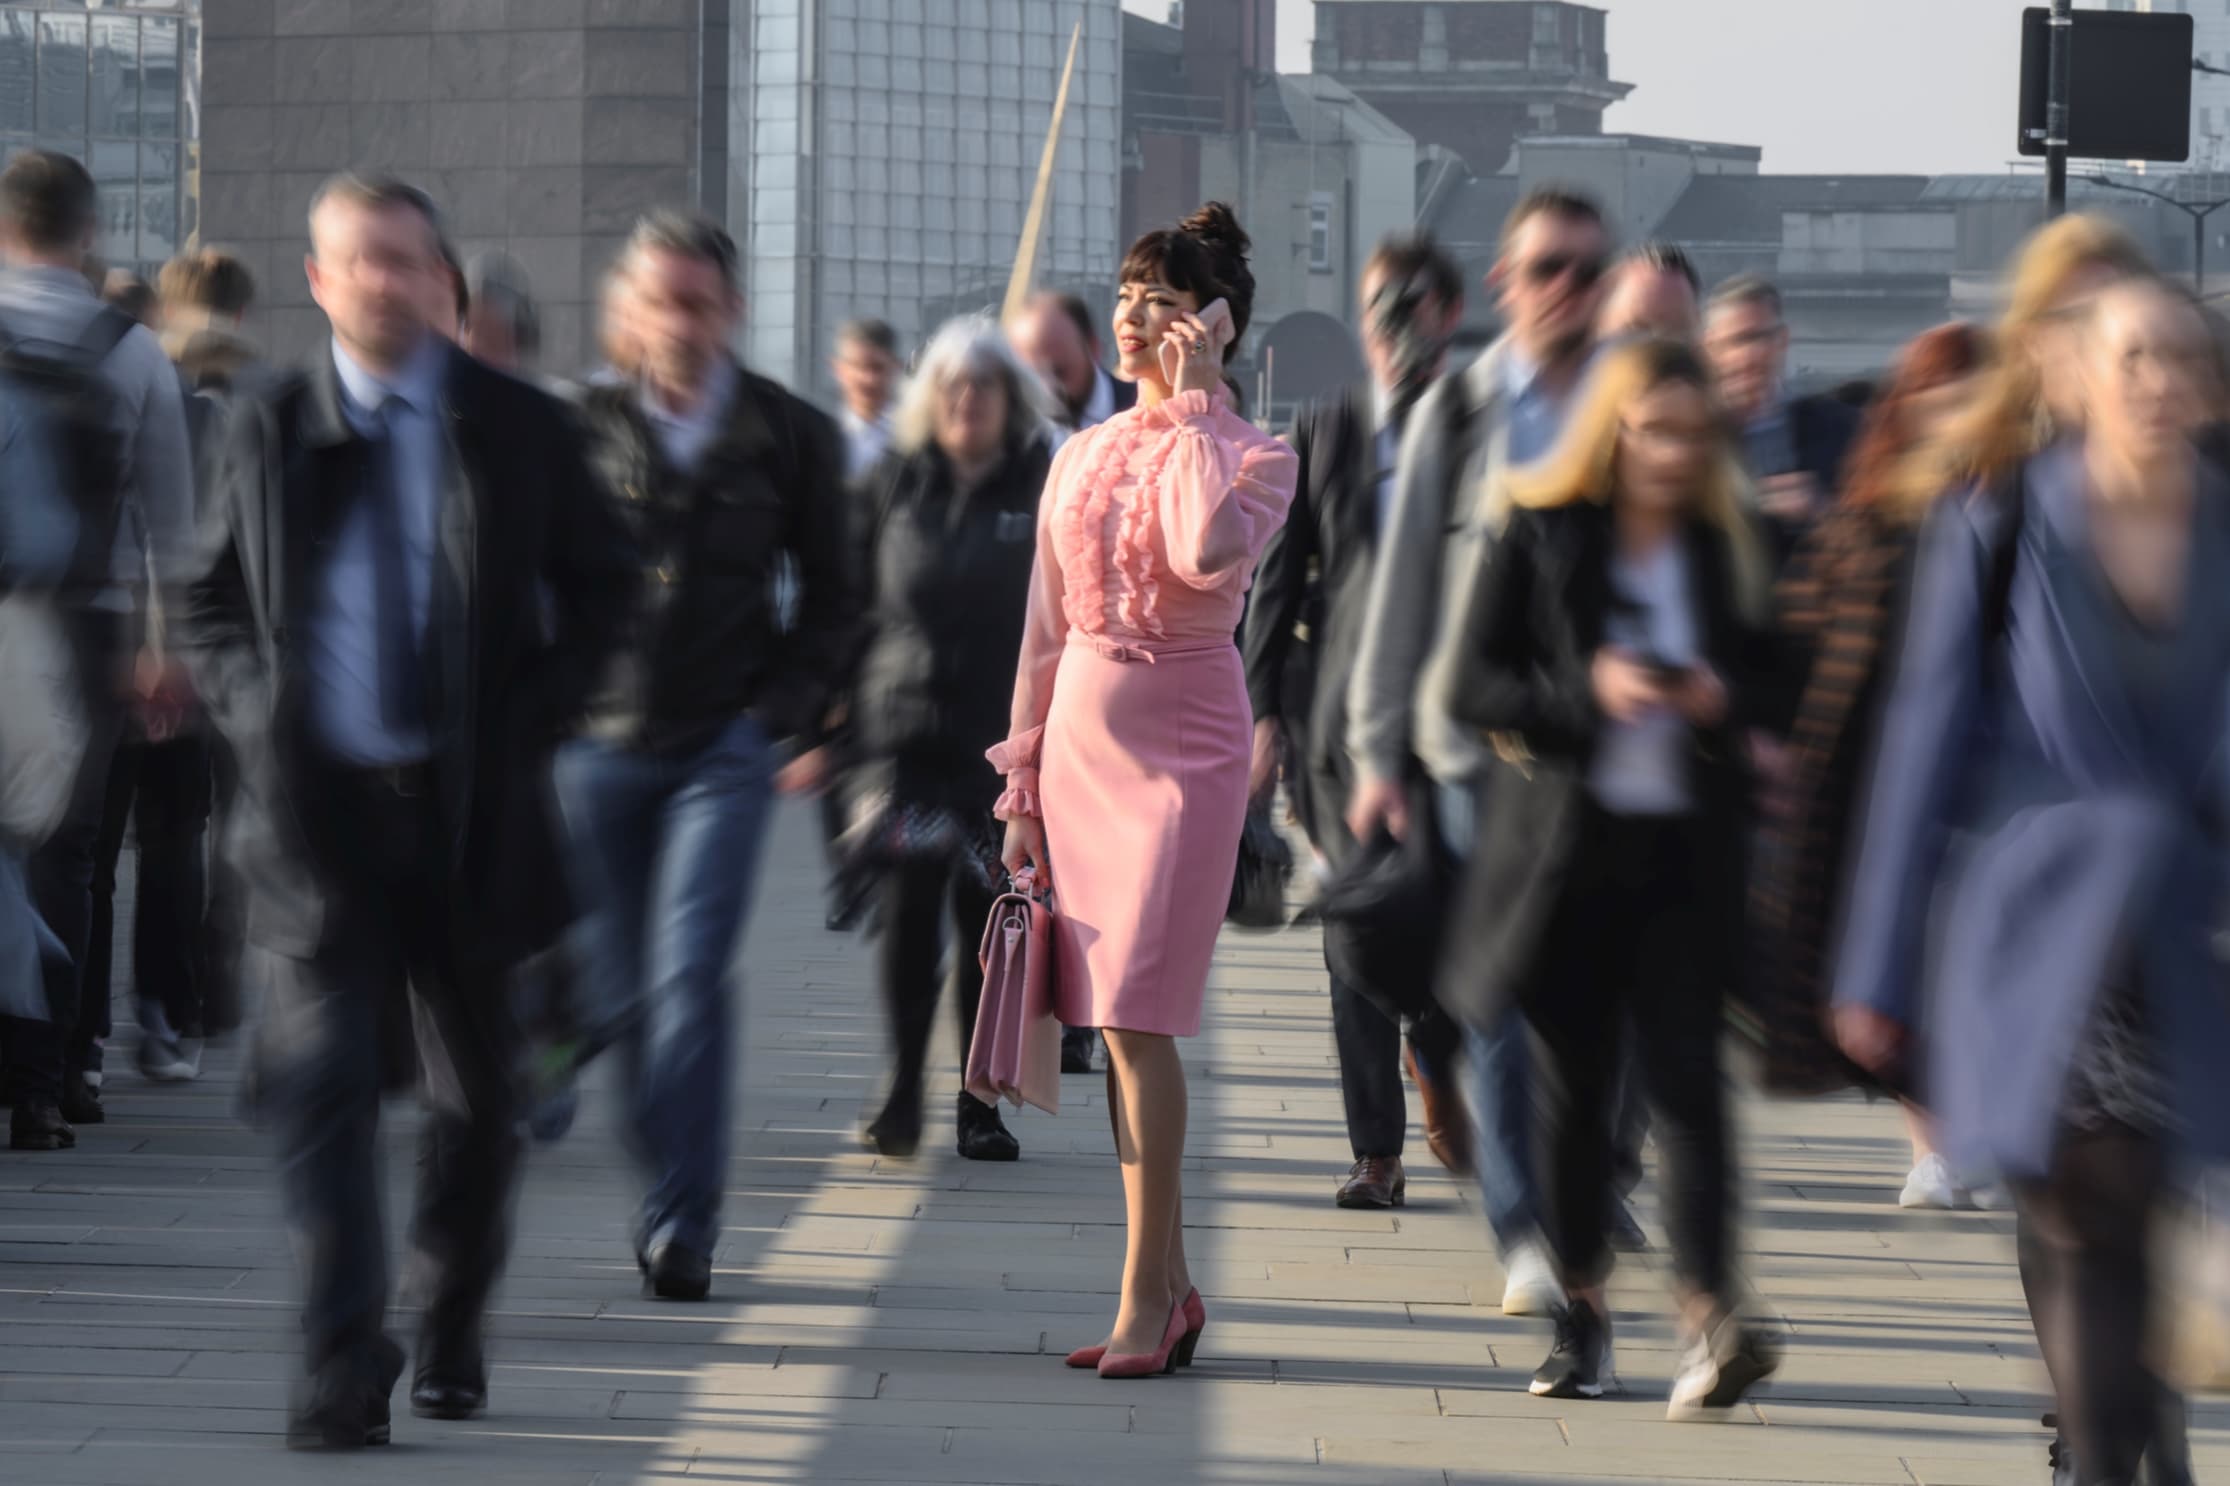 an image of people in city with a lady in pink talking over mobile phone in focus